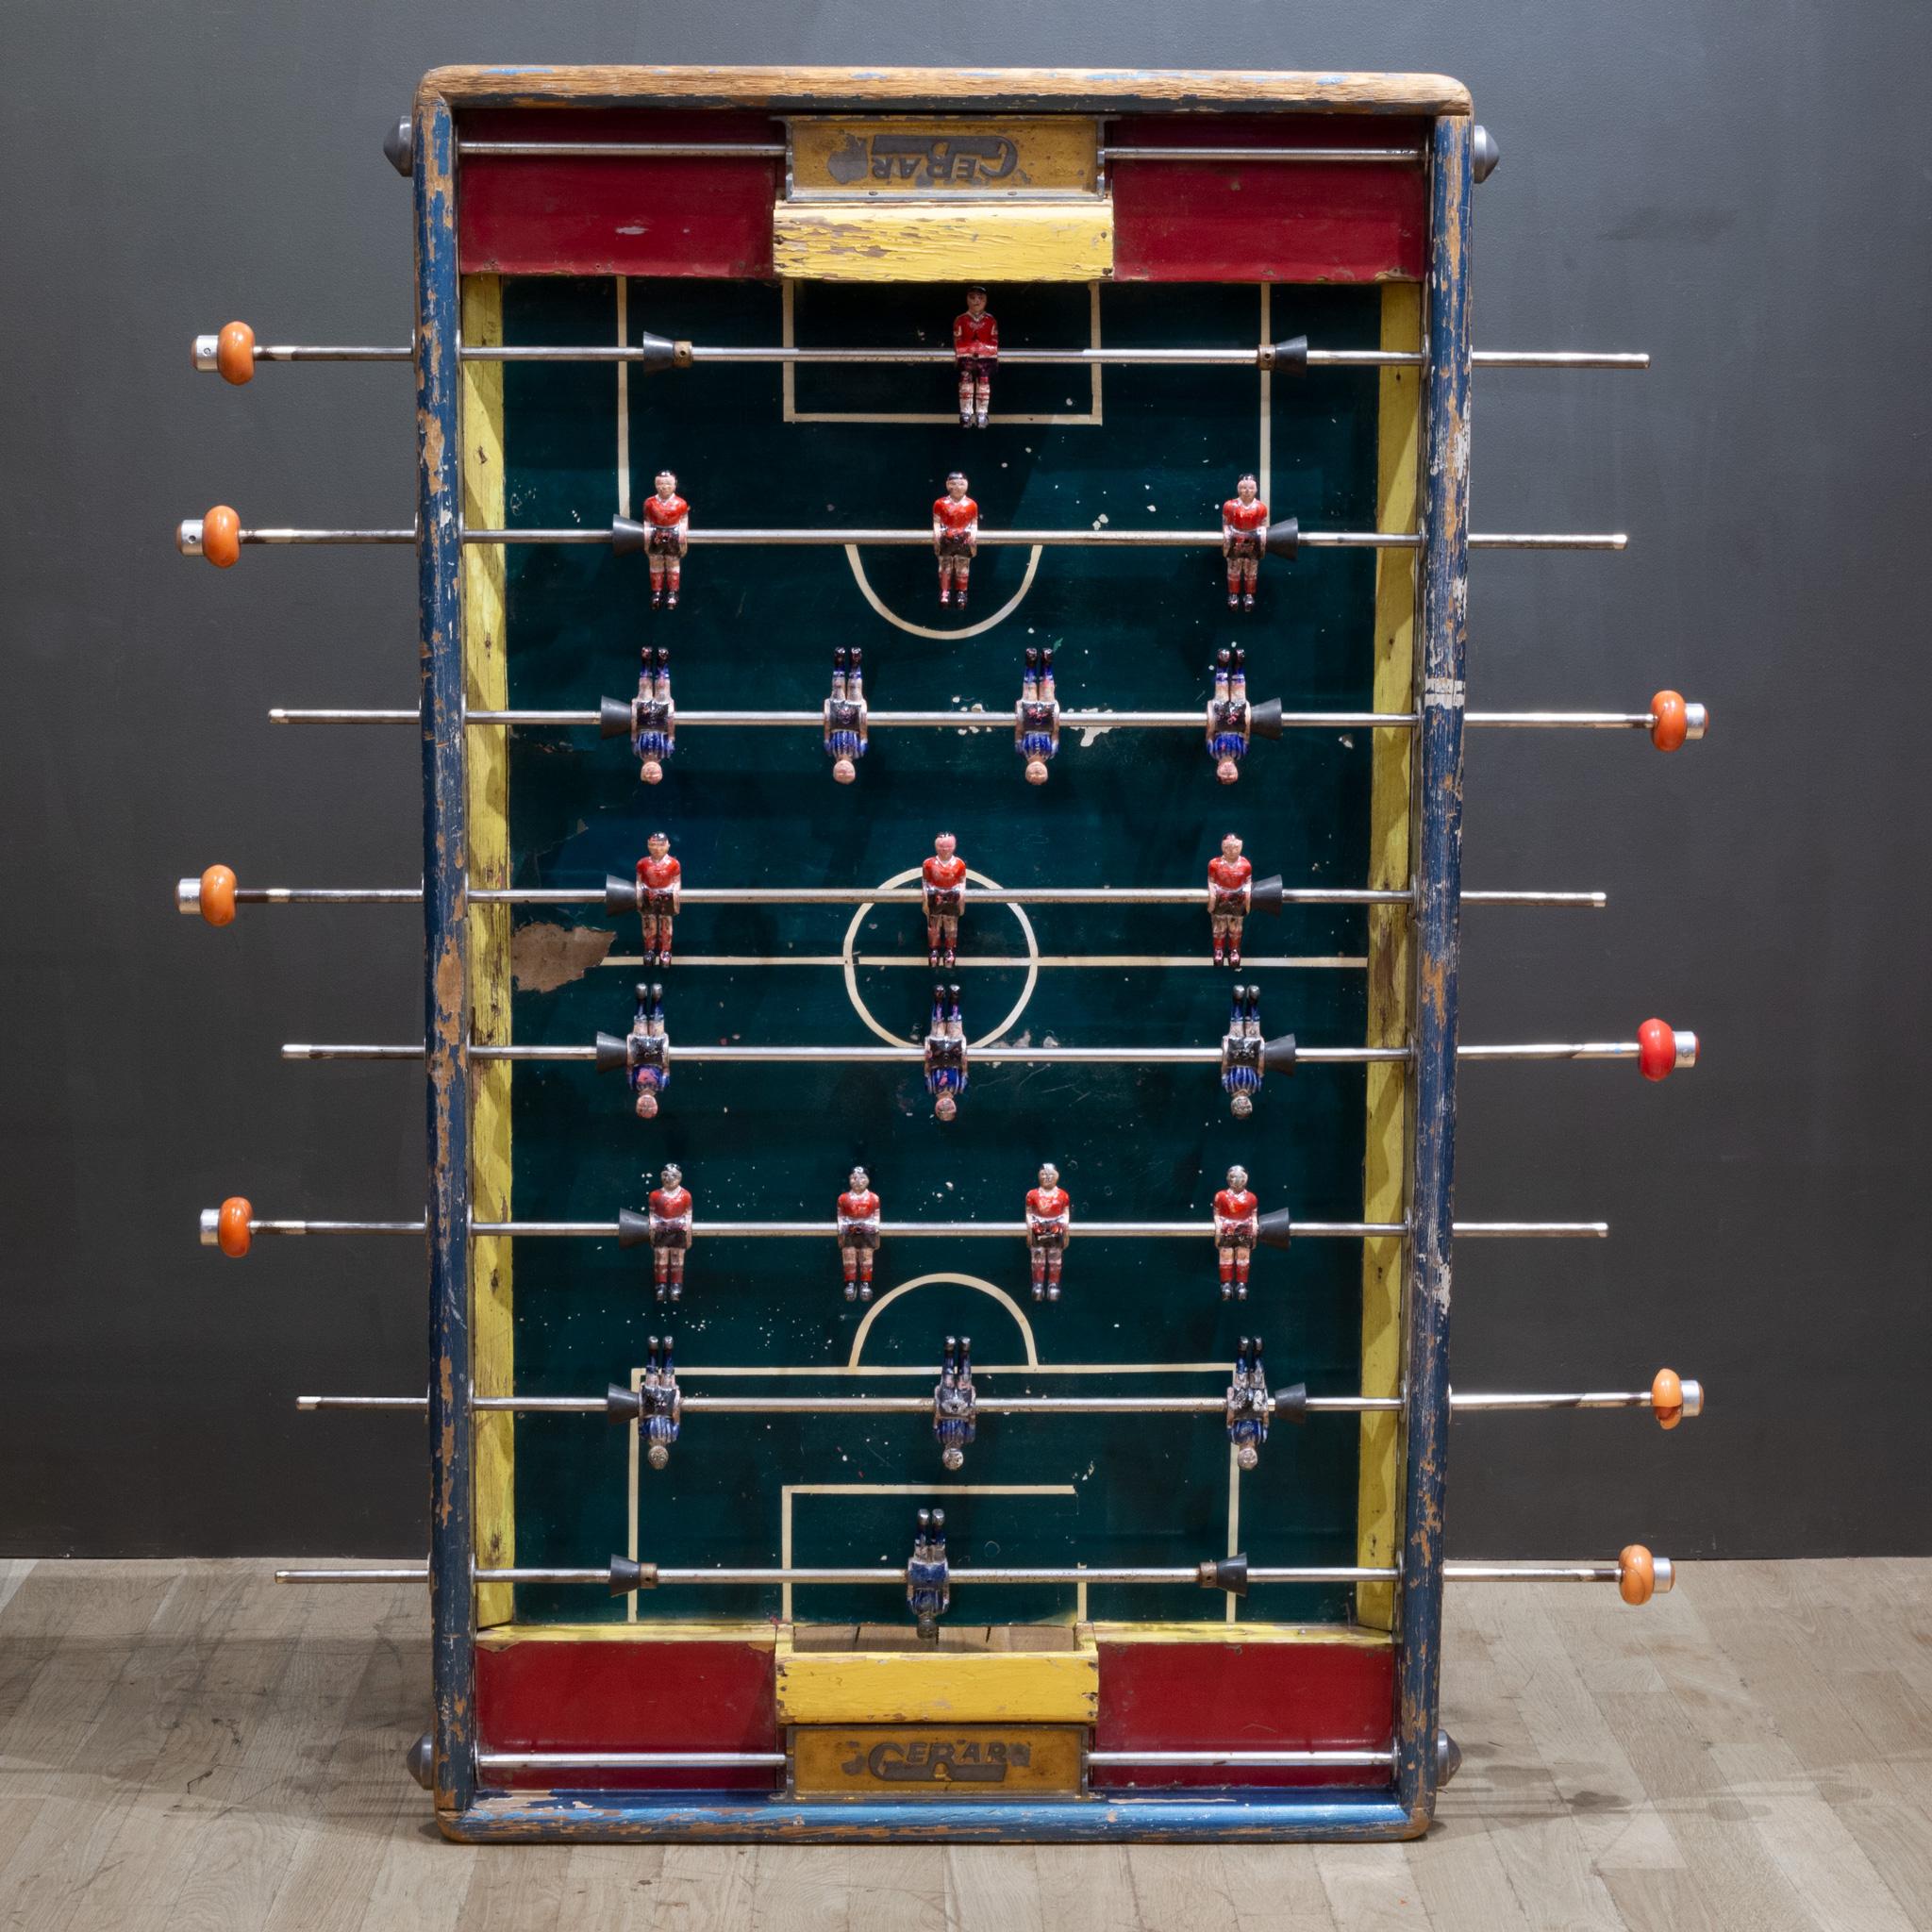 About

Contact us for more shipping options: S16 Home San Francisco.

An early 20th century wooden foosball table top with distressed, painted metal Mexican soccer players, rubber handles and metal 